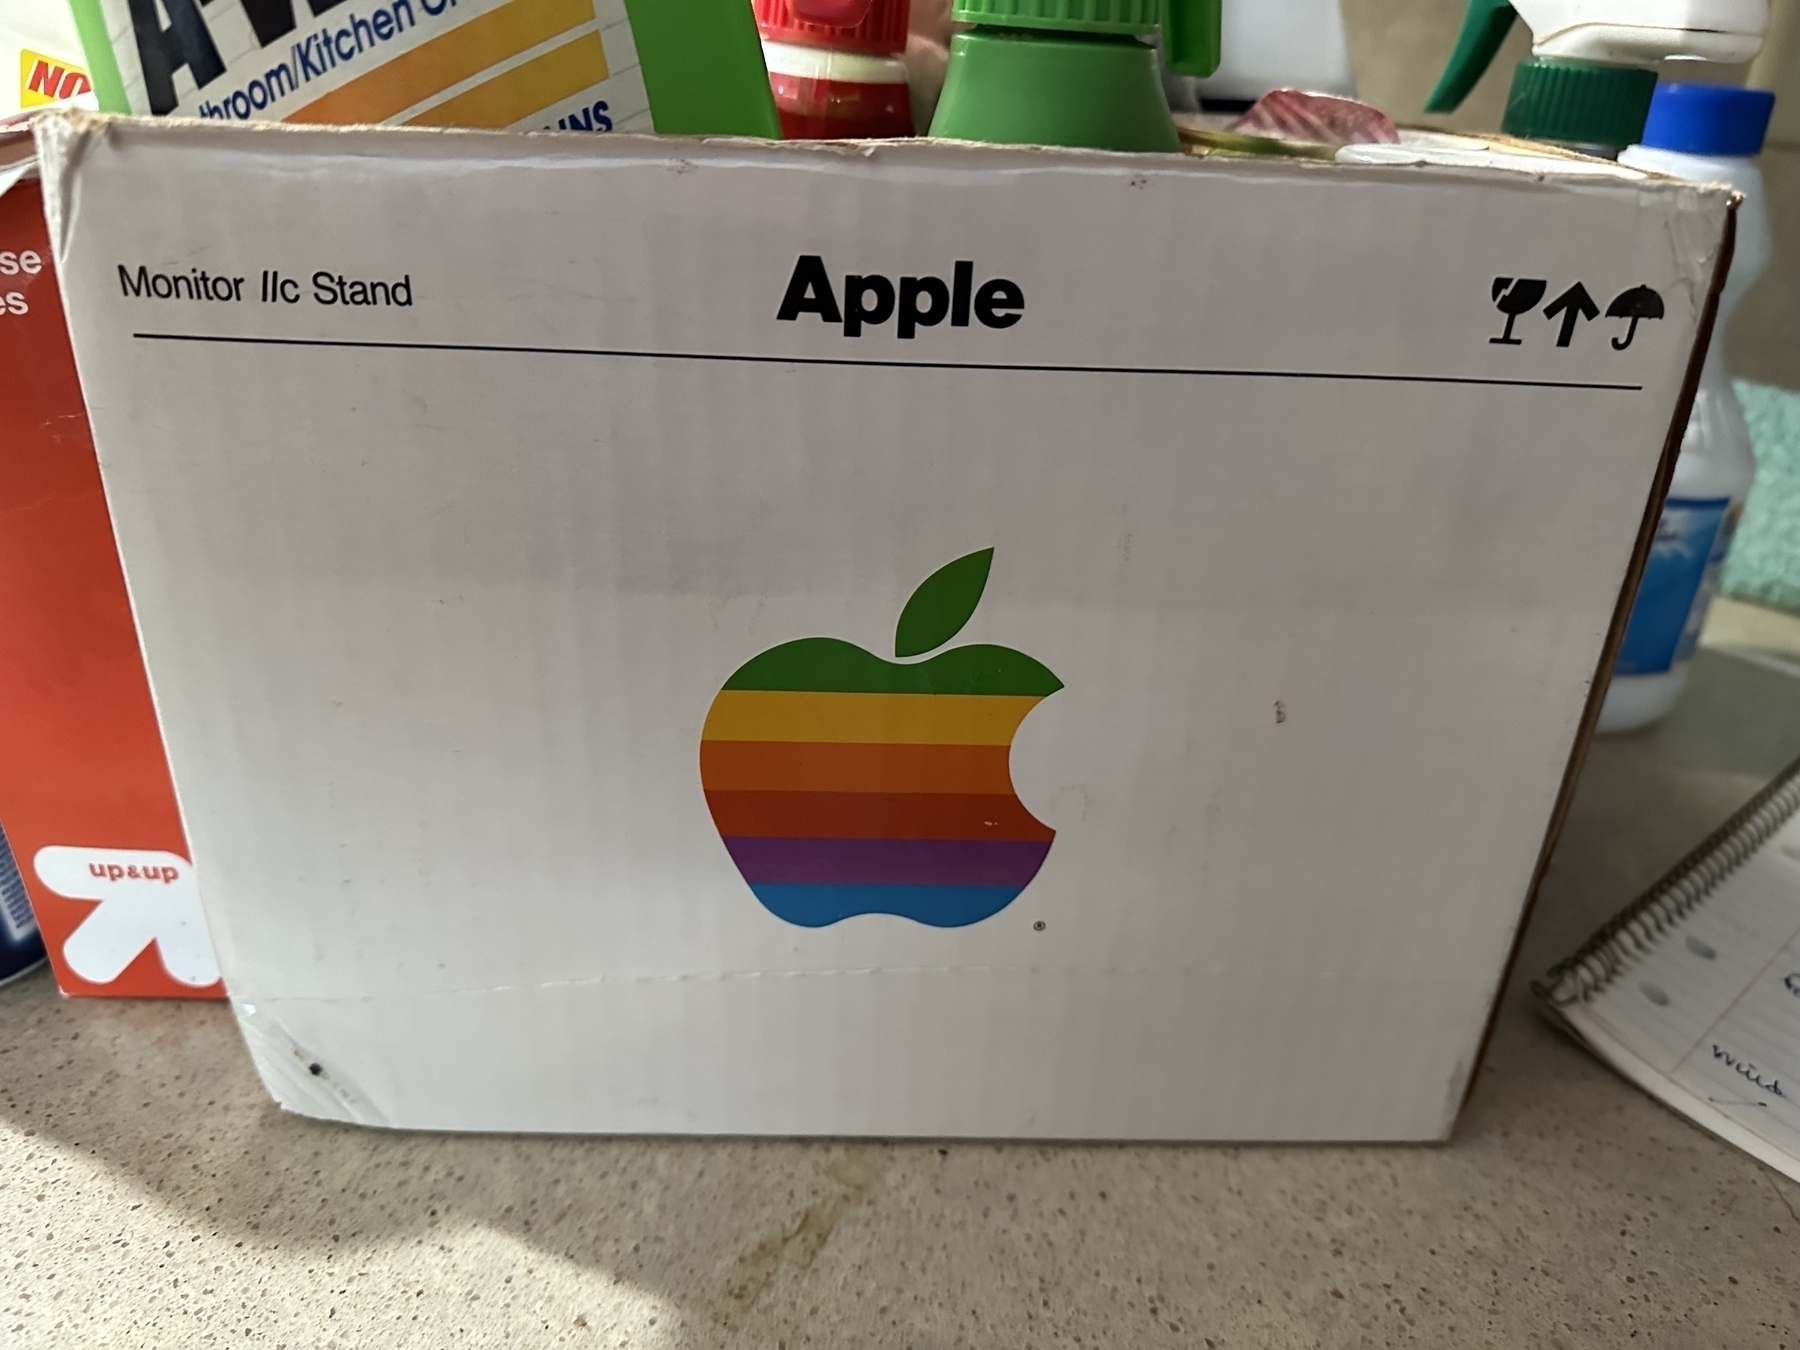 Old Apple box from a IIc monitor stand 